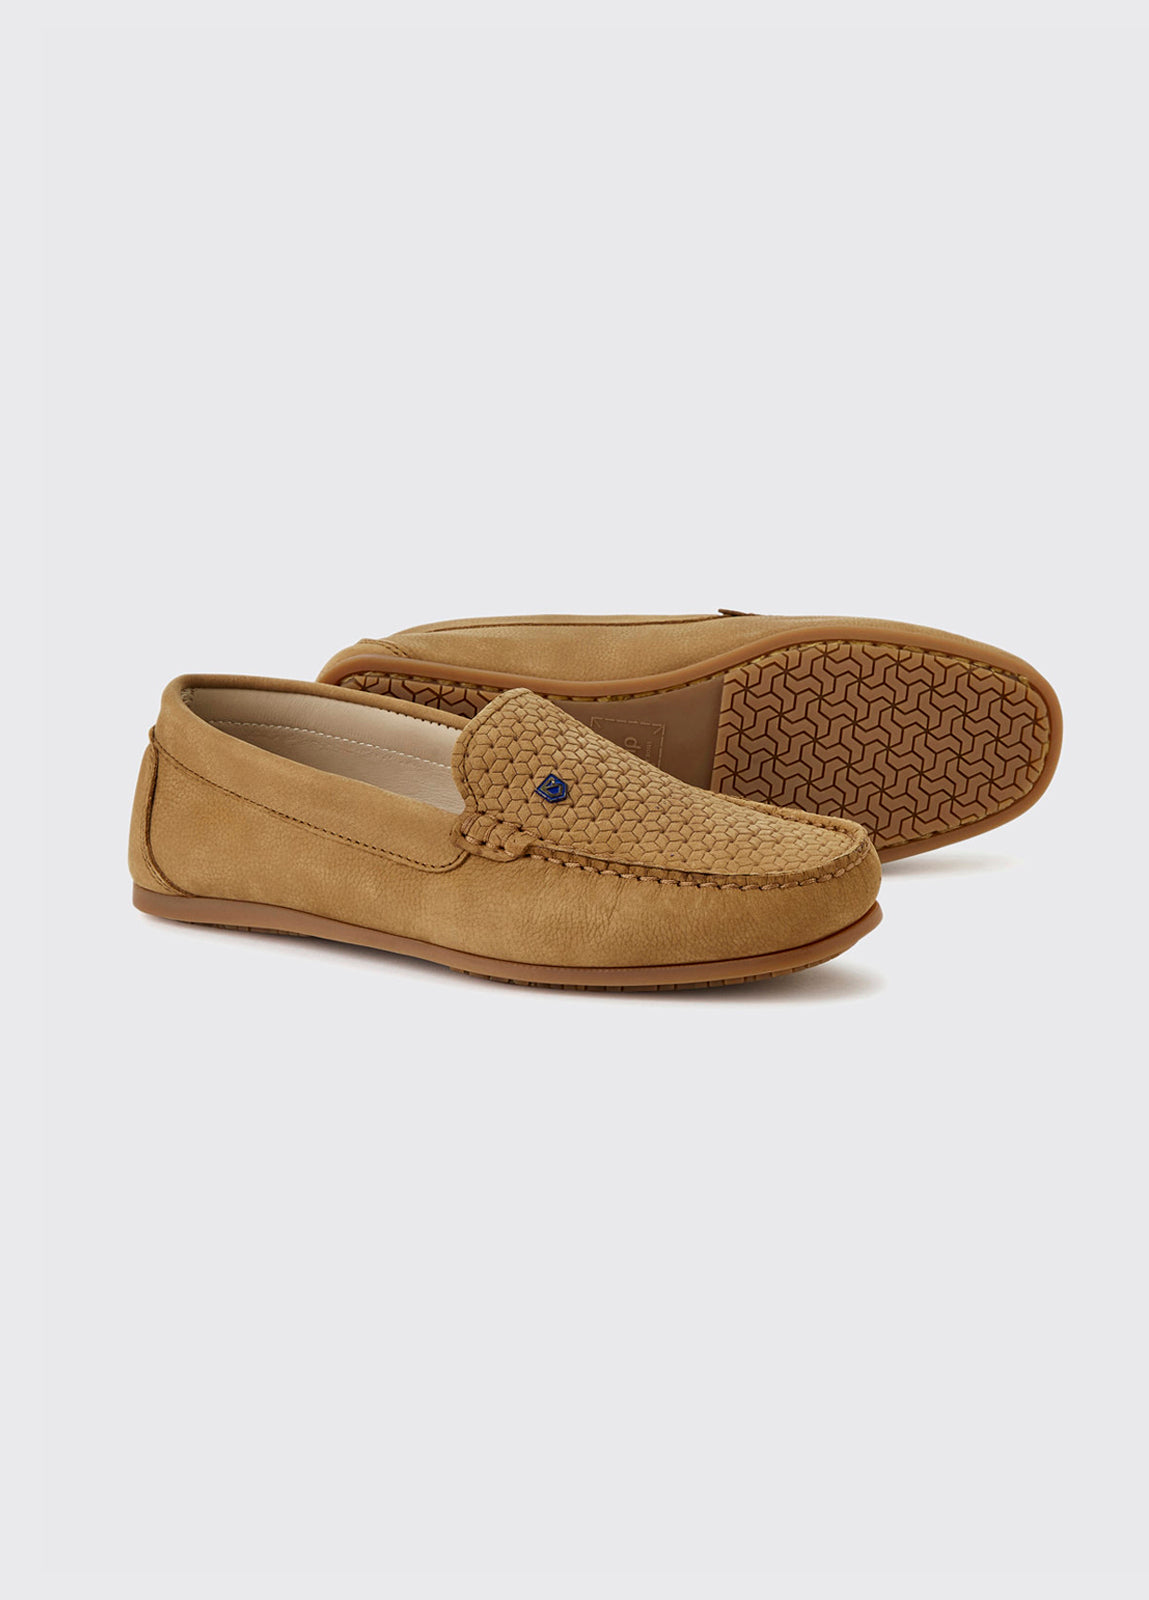 Dubarry Cannes Loafer Tan